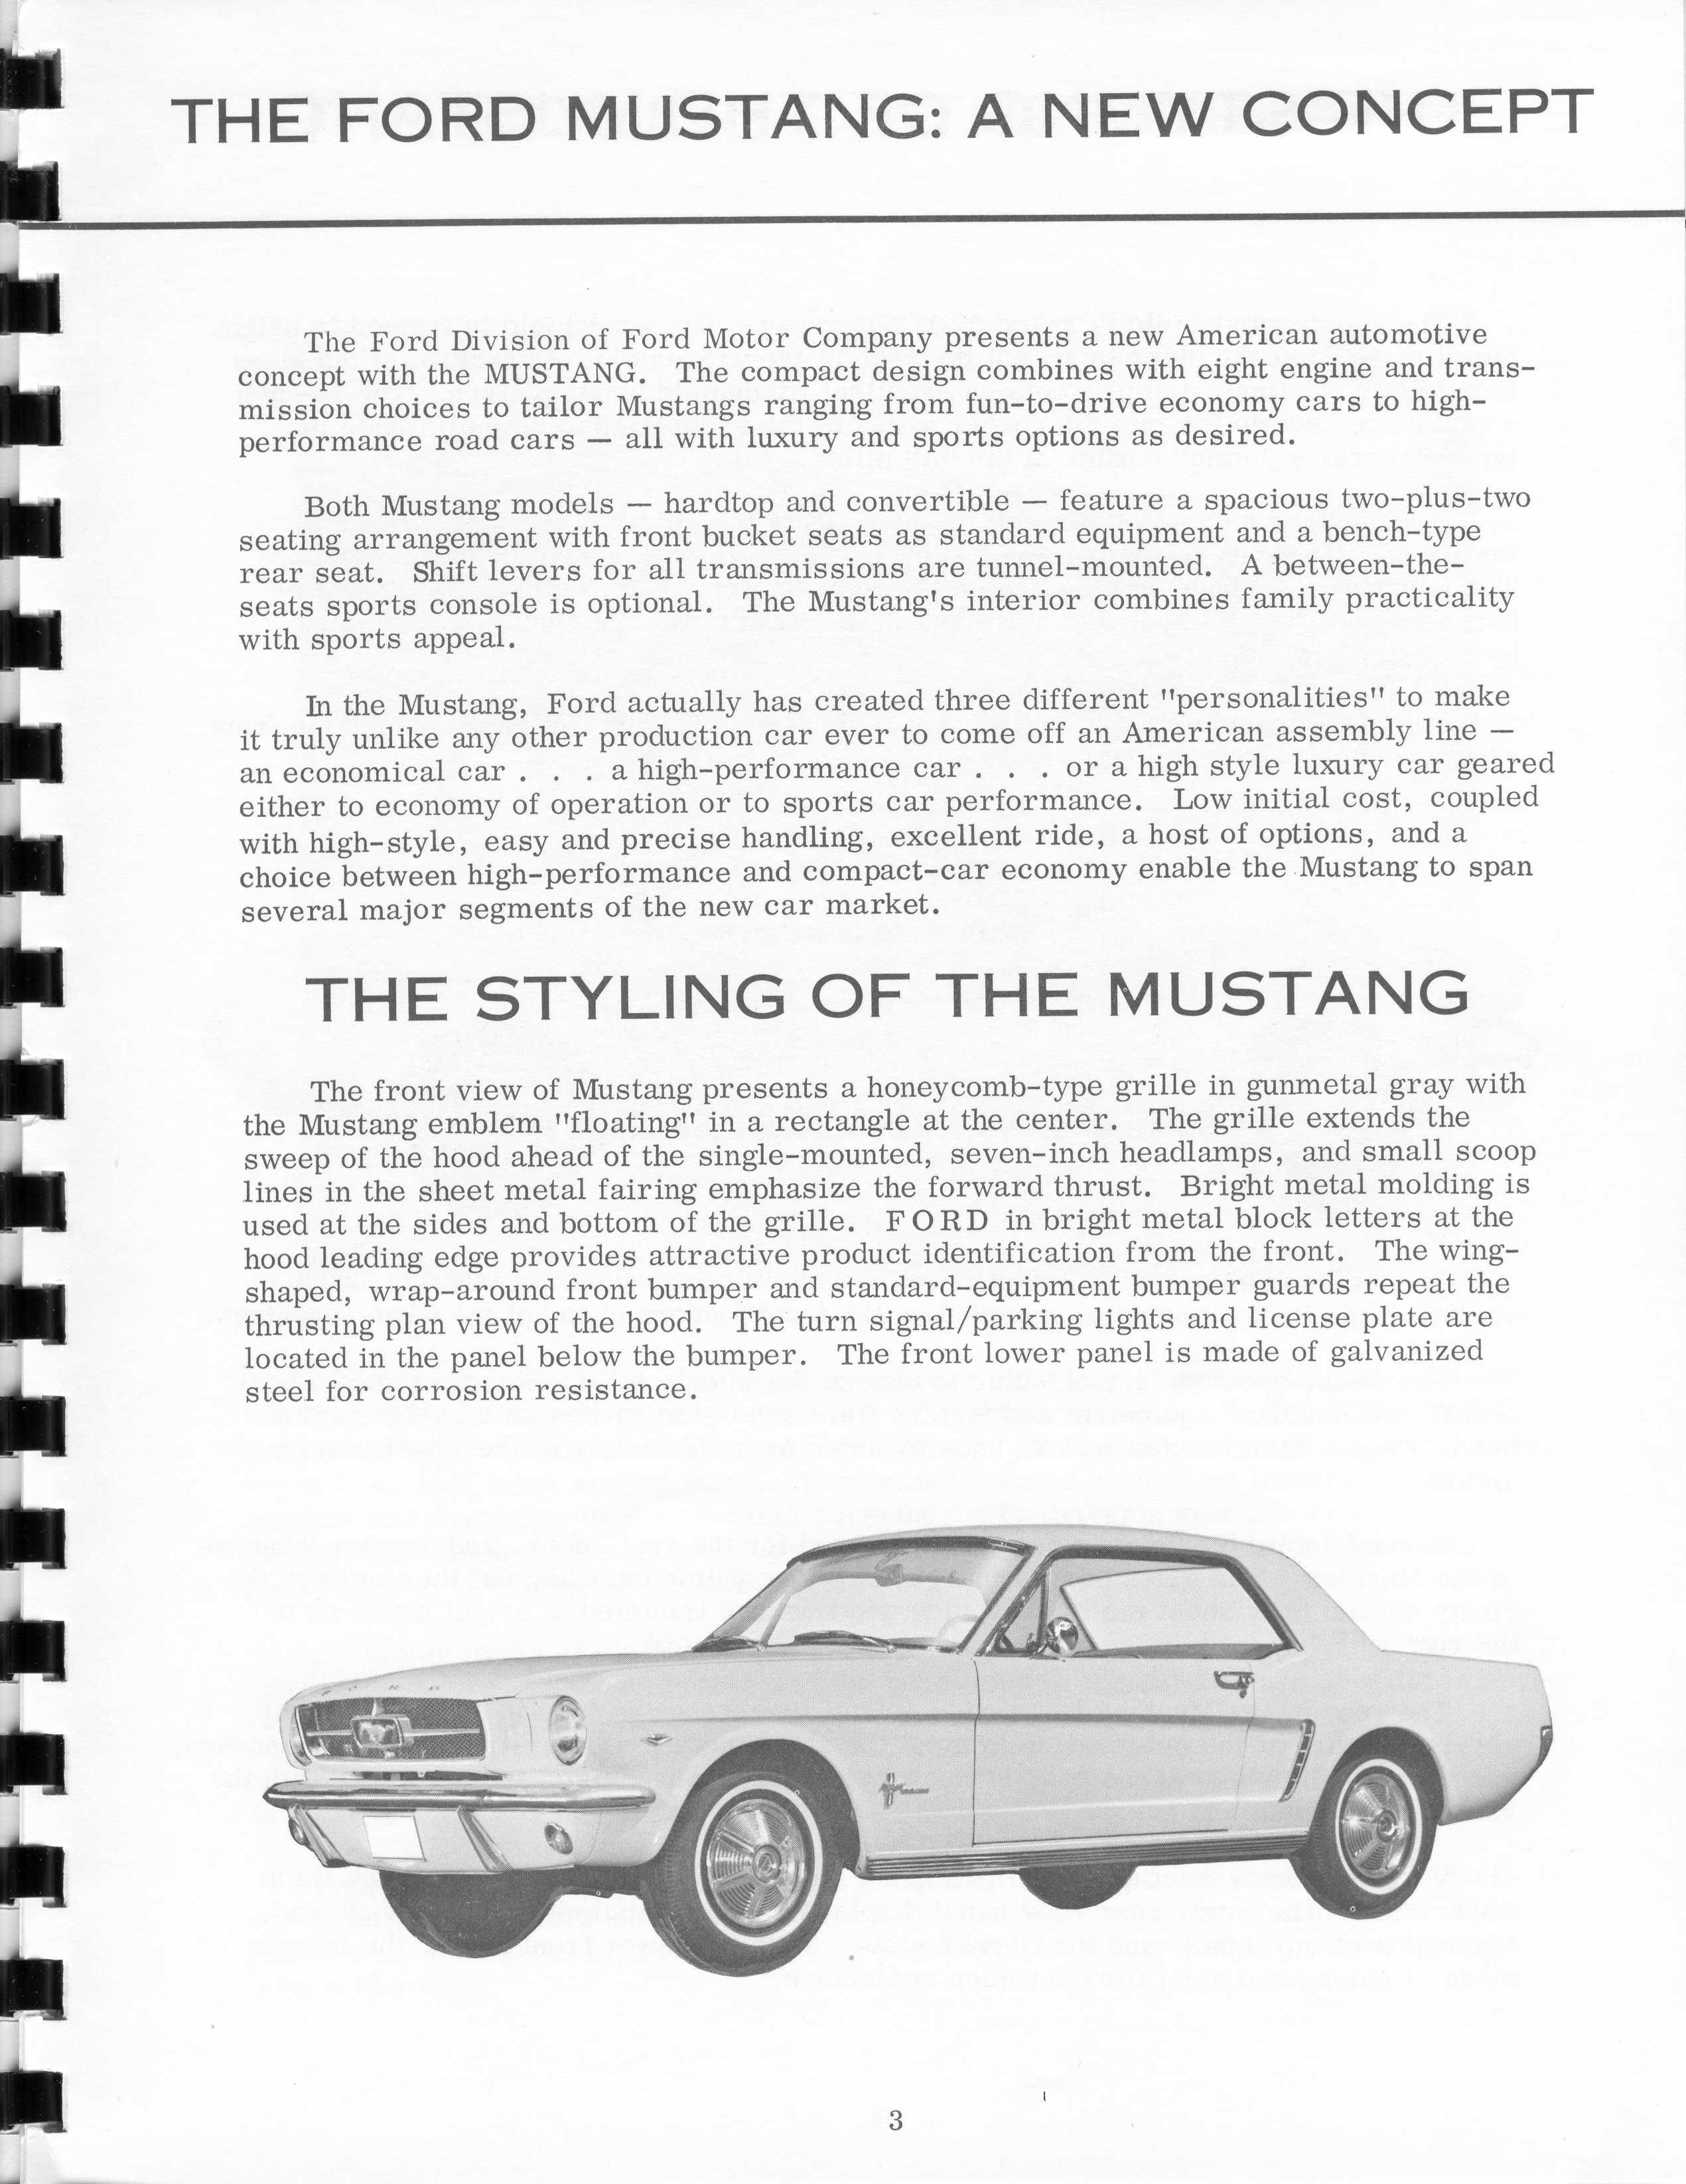 1964_Ford_Mustang_Press_Packet-03